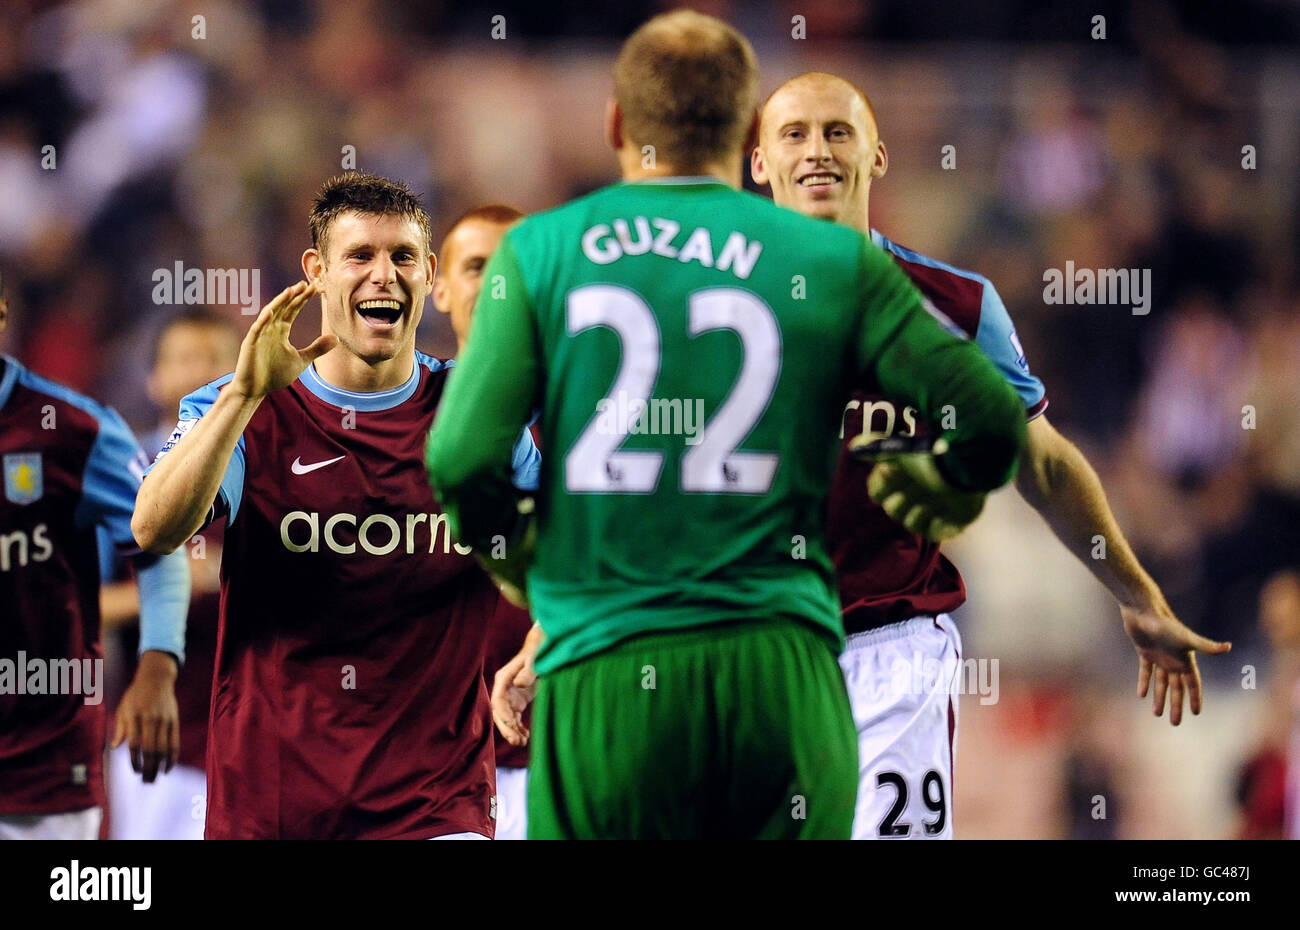 Aston Villa's James Milner (left) and Danny Collins (right) congratulate goalkeeper Brad Guzan after their victory in the penalty shootout against Sunderland during the Carling Cup match at the Stadium of Light, Sunderland. Stock Photo